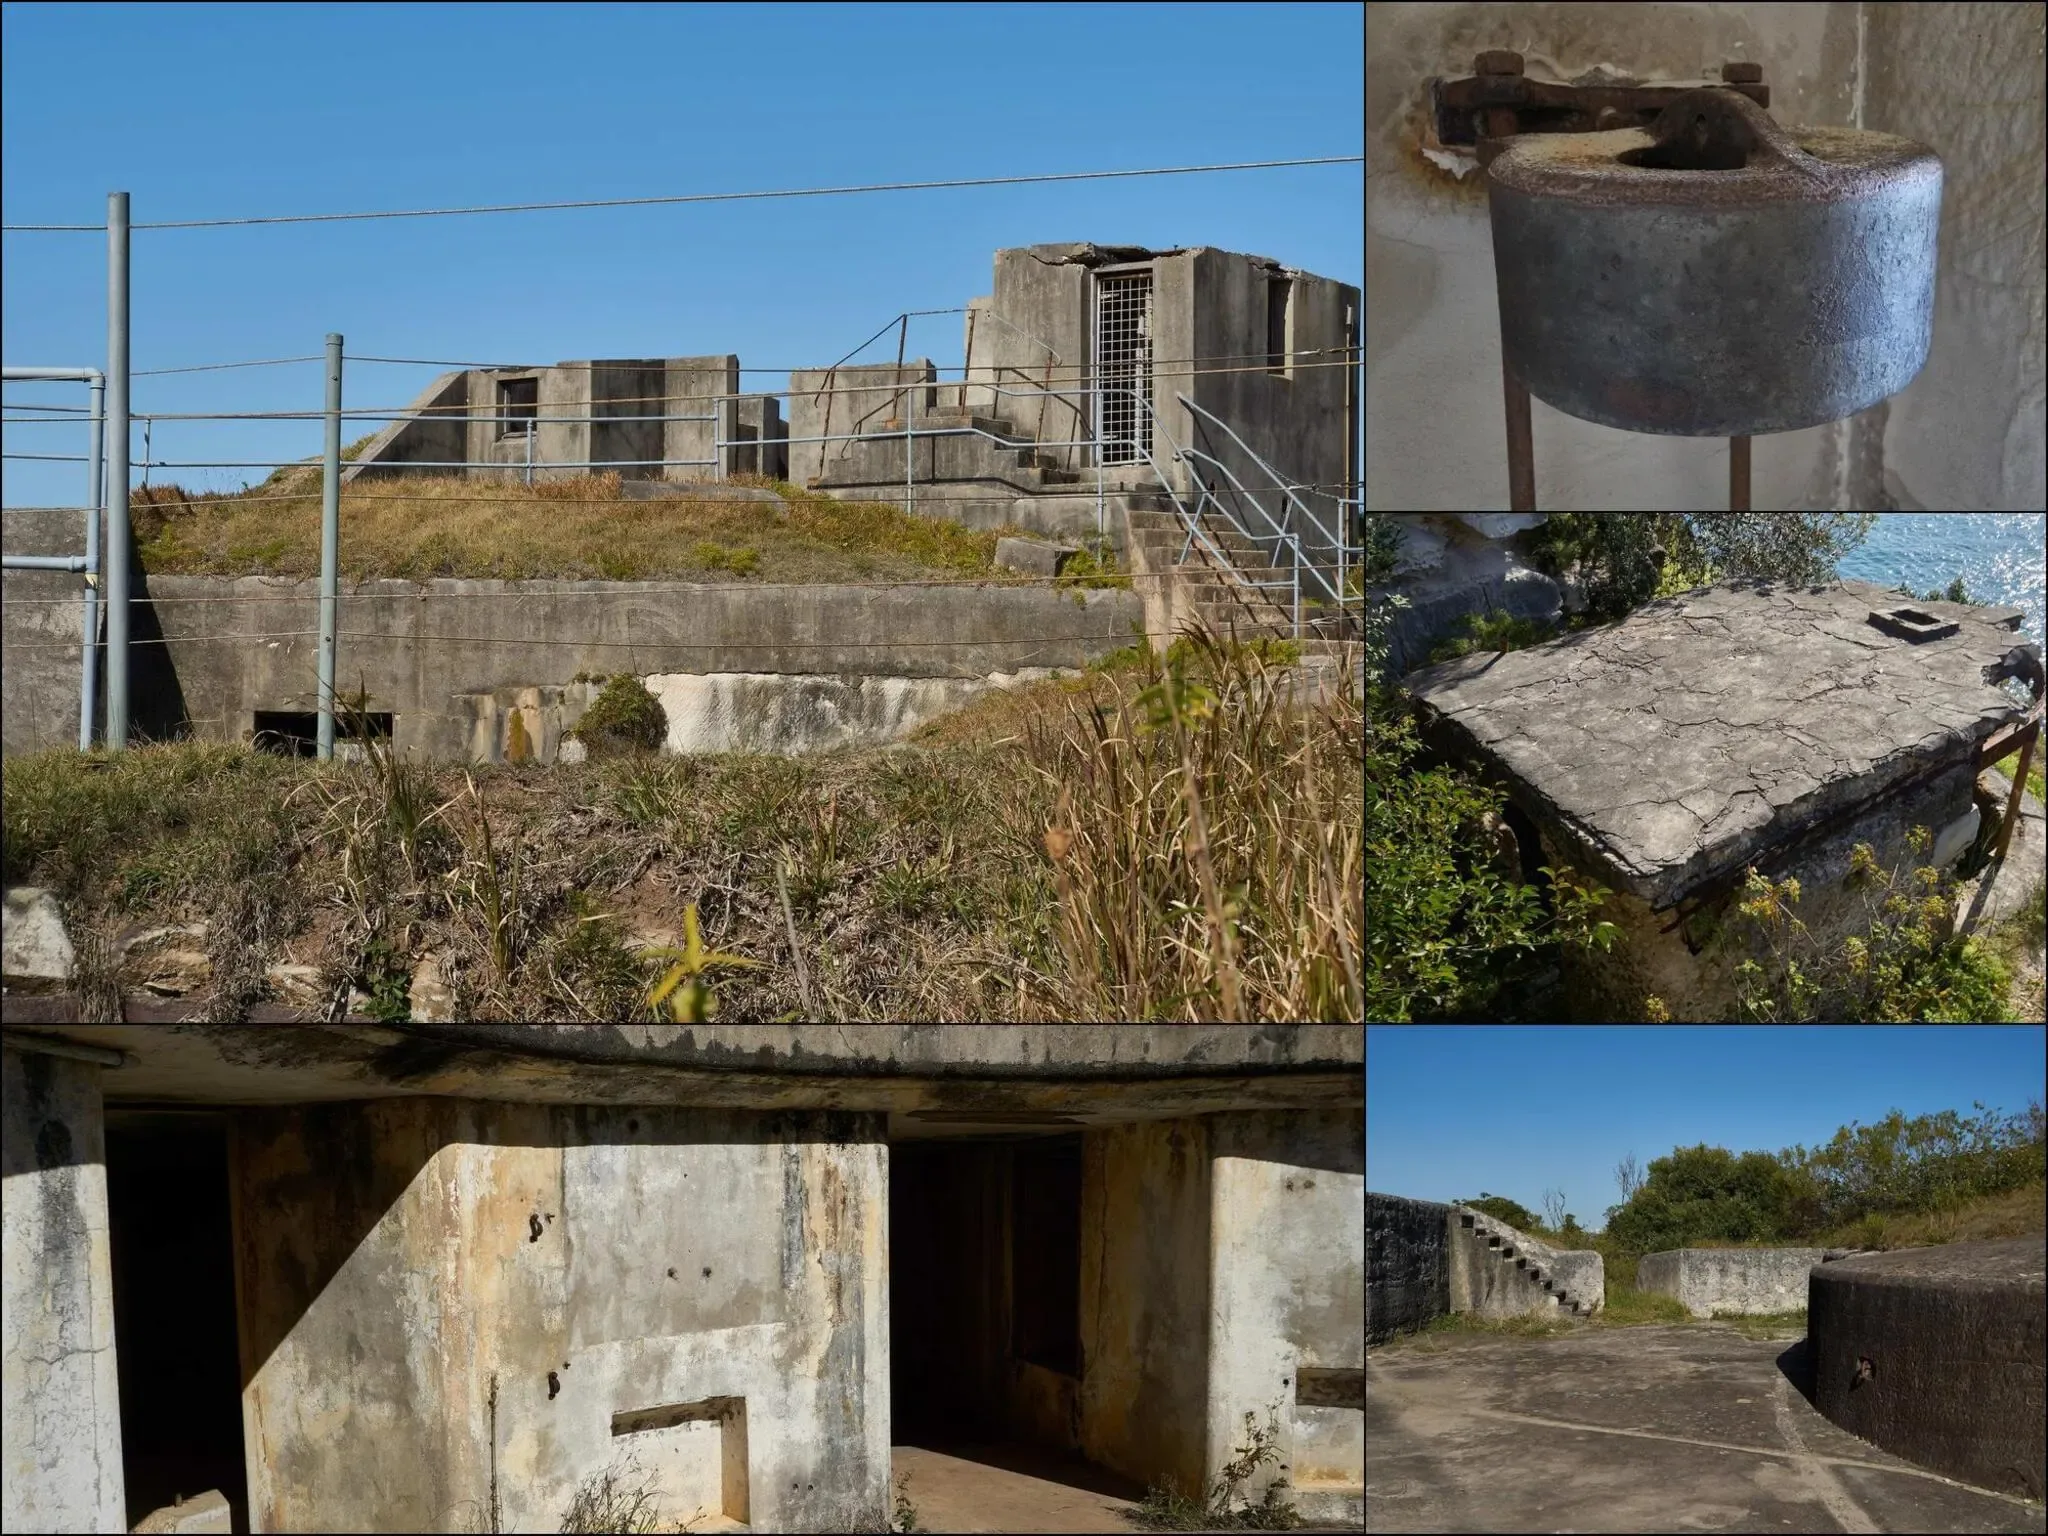 515 photos of Round Concrete Fortifications